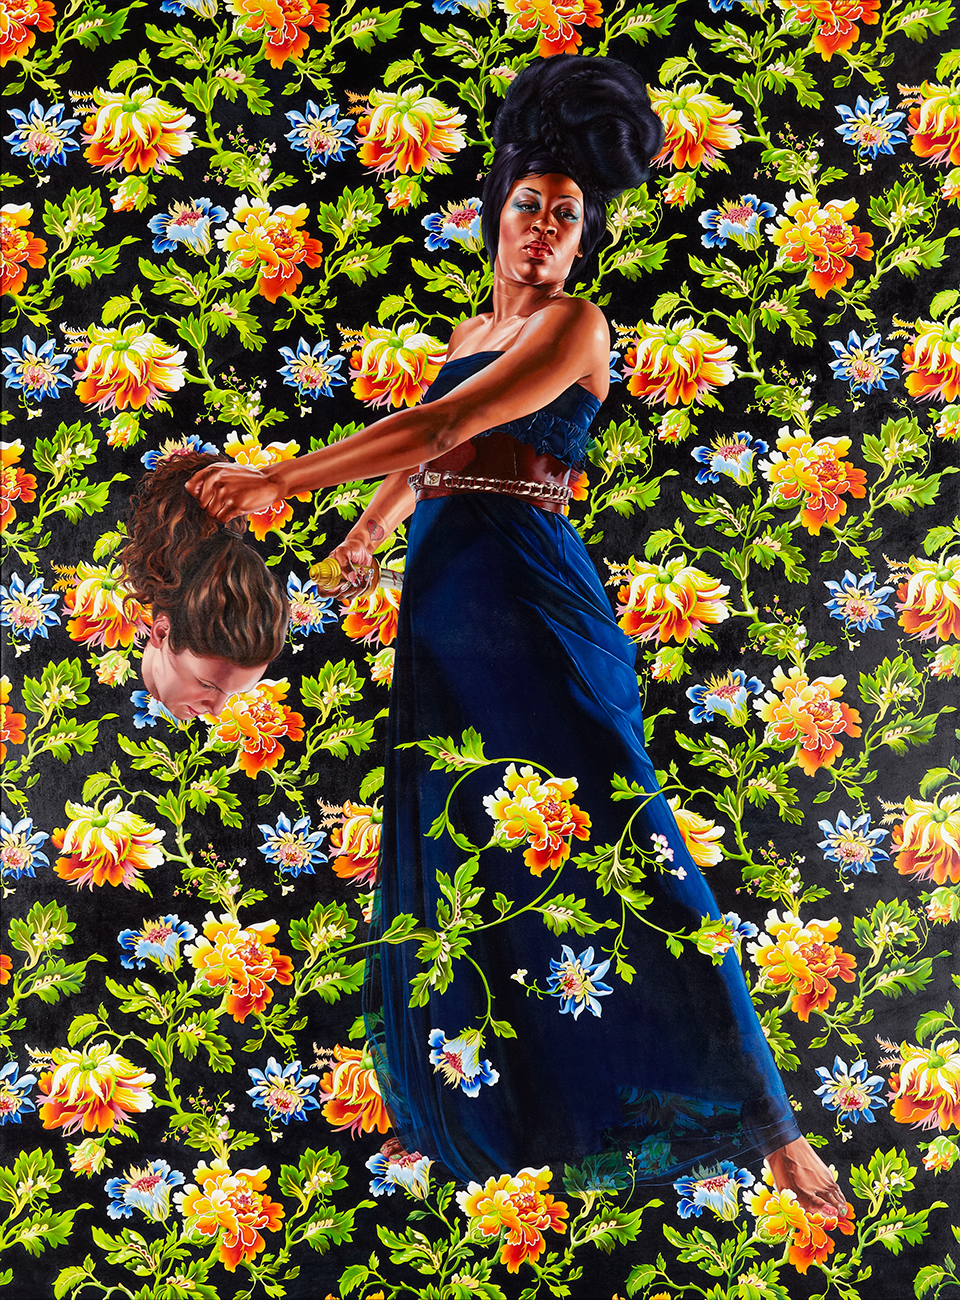 judith and holofernes by kehinde wiley, a painting of a black woman with the head of a white individual with long brown hair on a vibrant floral background